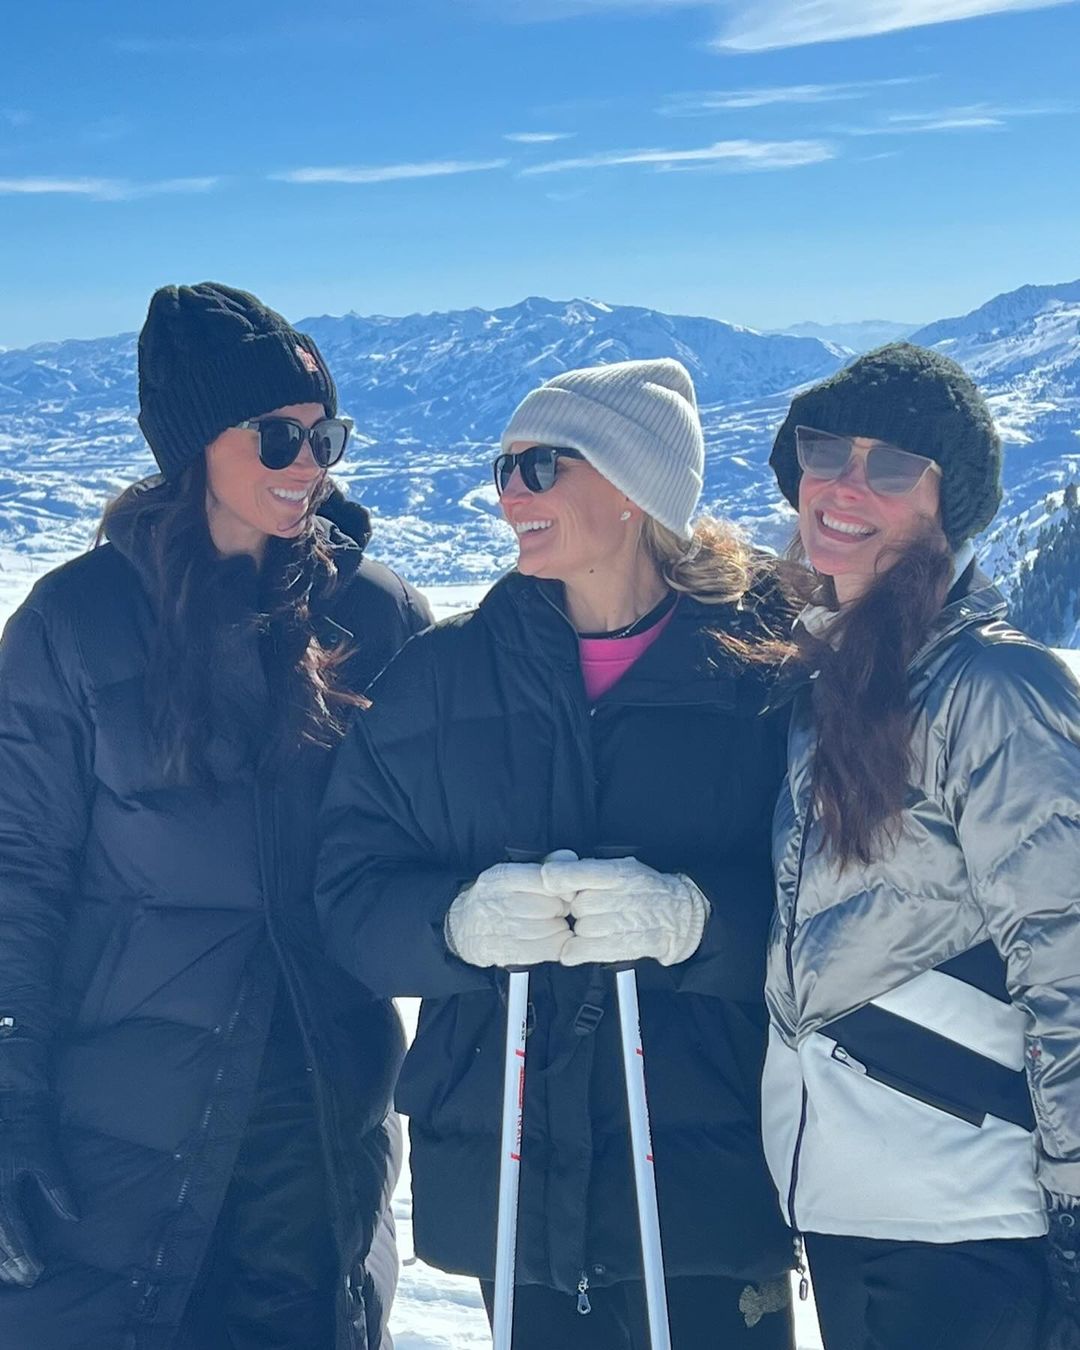 Duchess Meghan went on a ski trip to Powder Mountain with her girlfriends